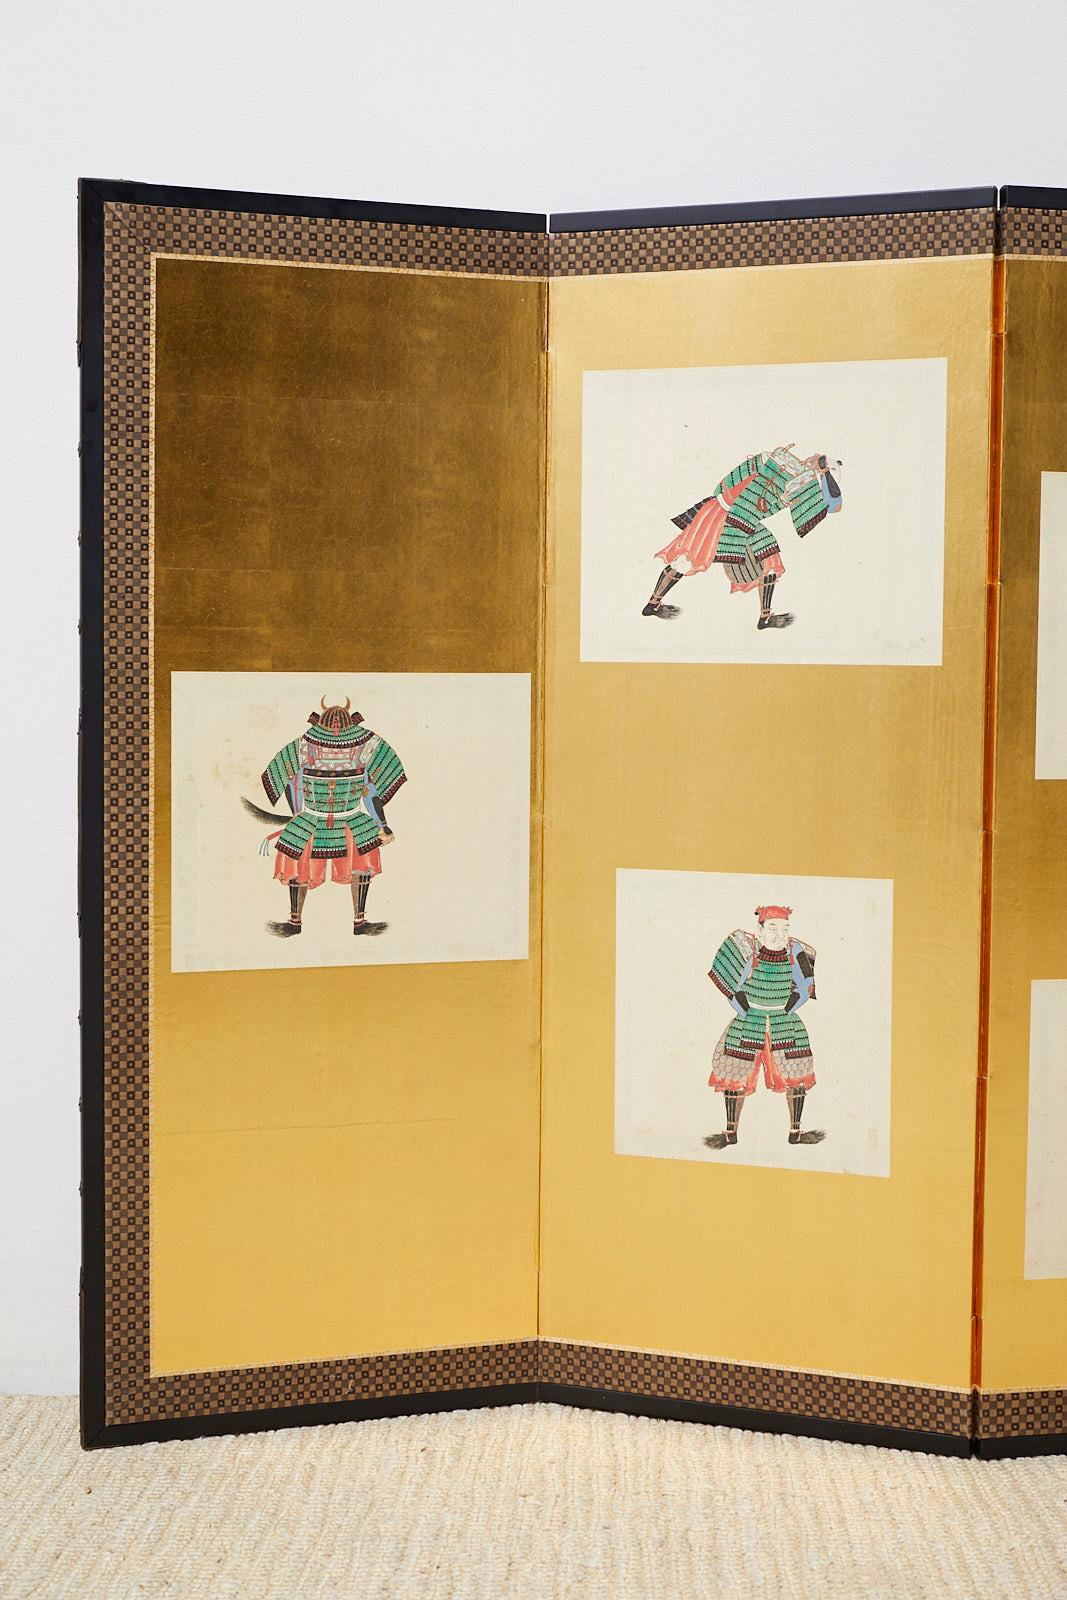 Fascinating Japanese Meiji period six-panel screen depicting a samurai dressing into traditional dou armour for warriors. Late 19th century-early 20th century screen features smaller ink and color pigment scenes varying in size of approximately 13